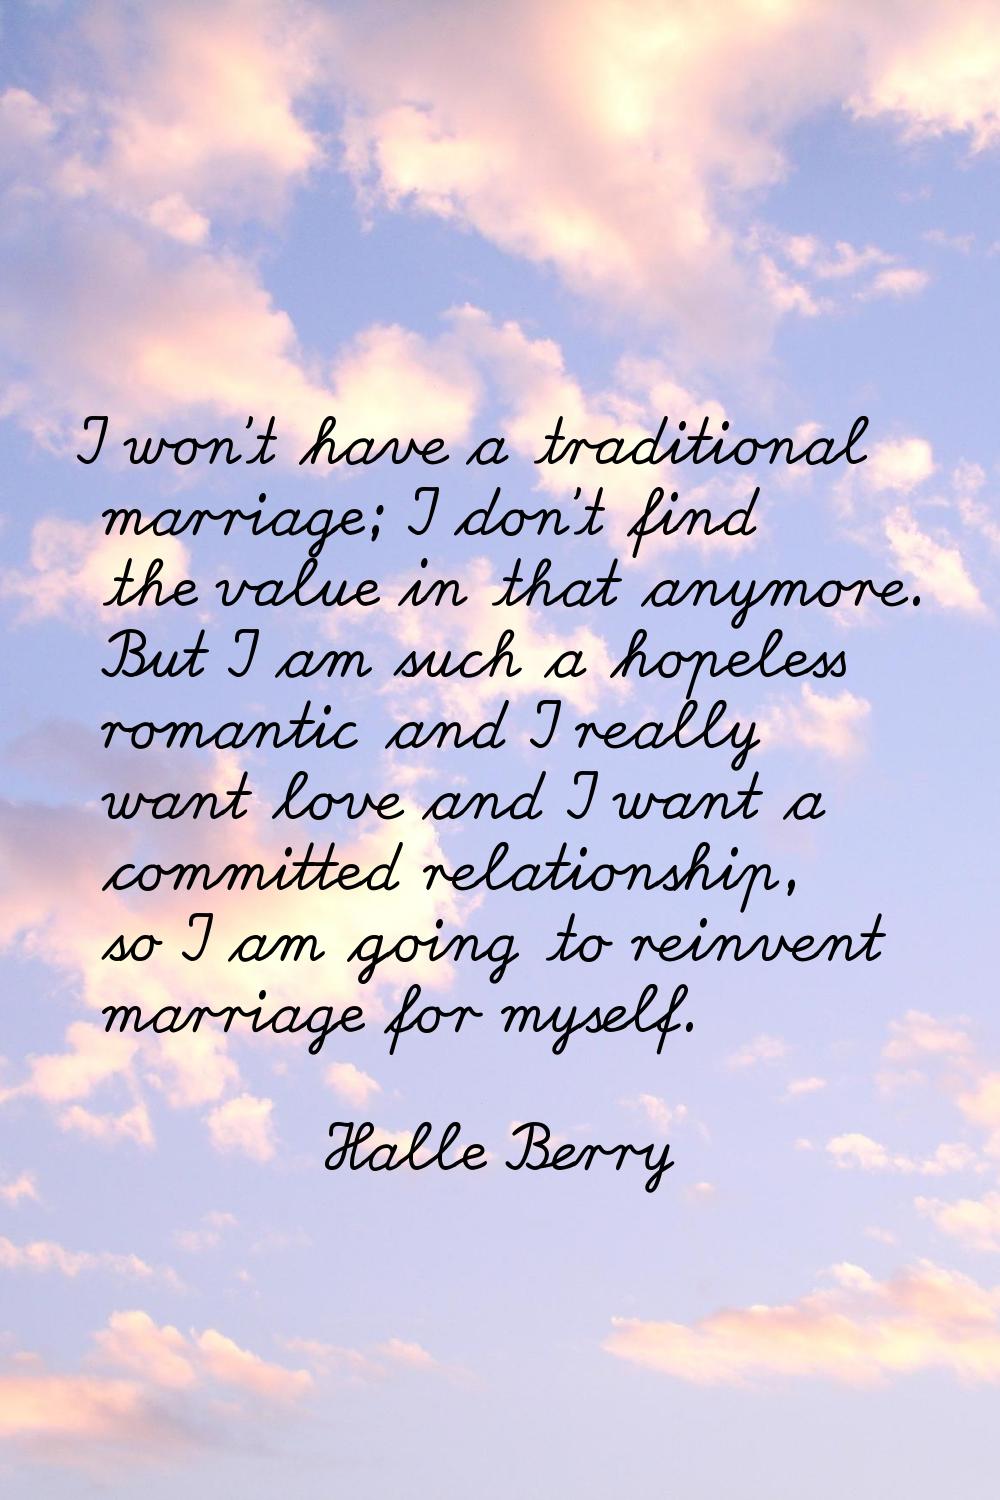 I won't have a traditional marriage; I don't find the value in that anymore. But I am such a hopele